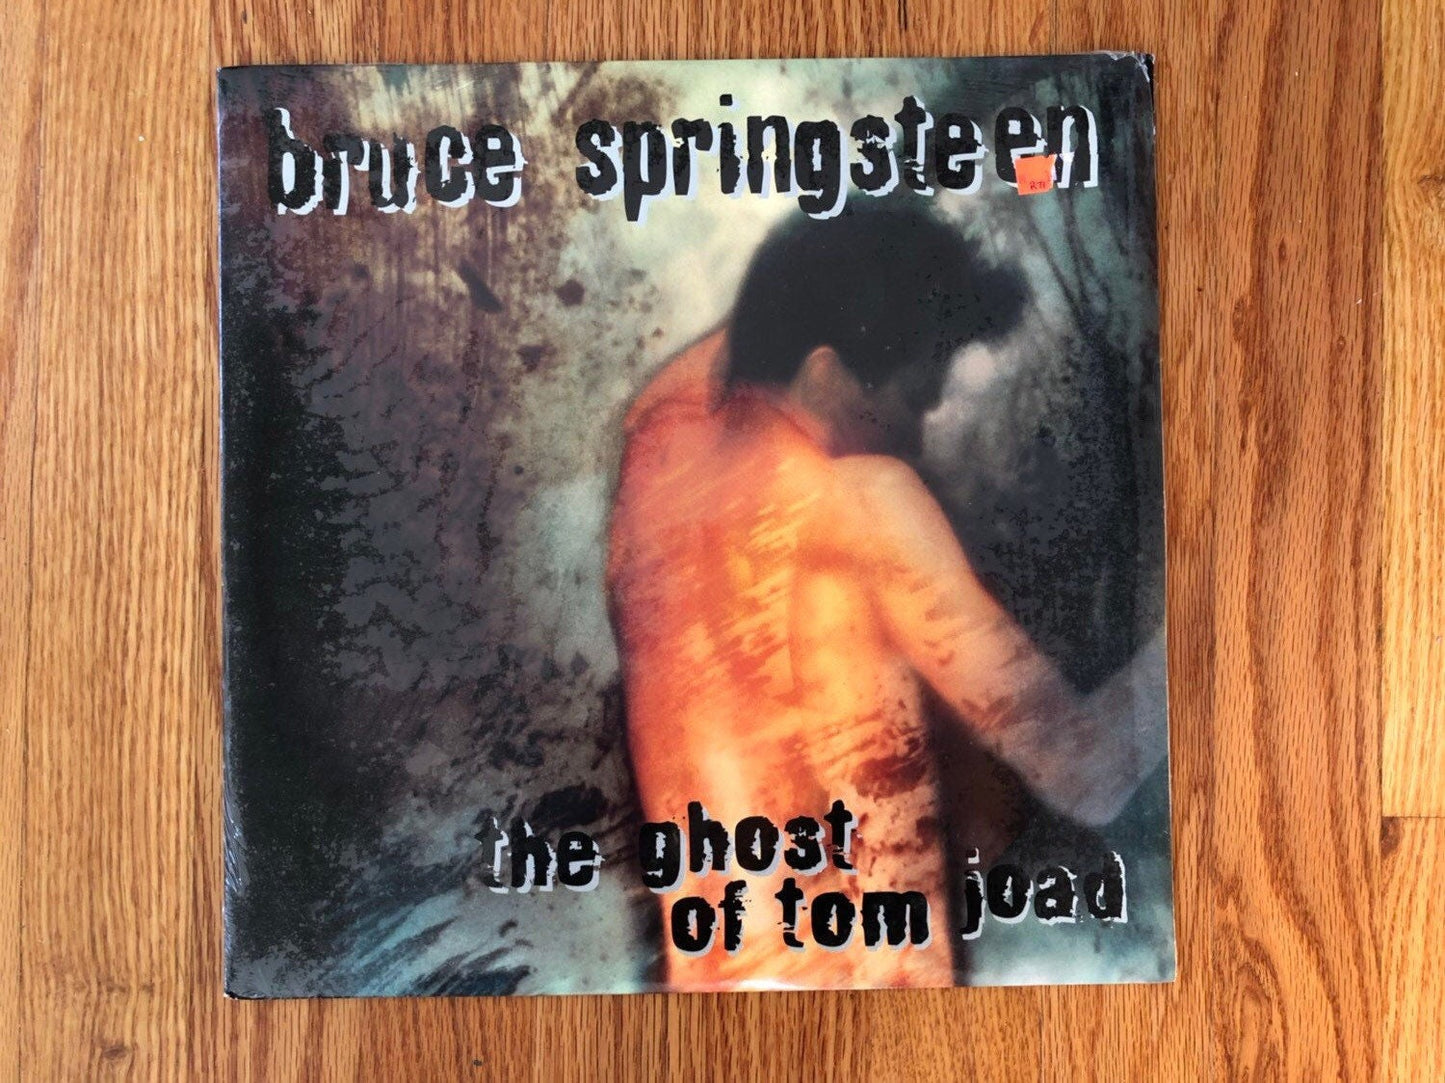 Bruce Springsteen |The Ghost of Tom Joad | 1995 Vintage Records | C 67484 | Vintage Bruce Springsteen